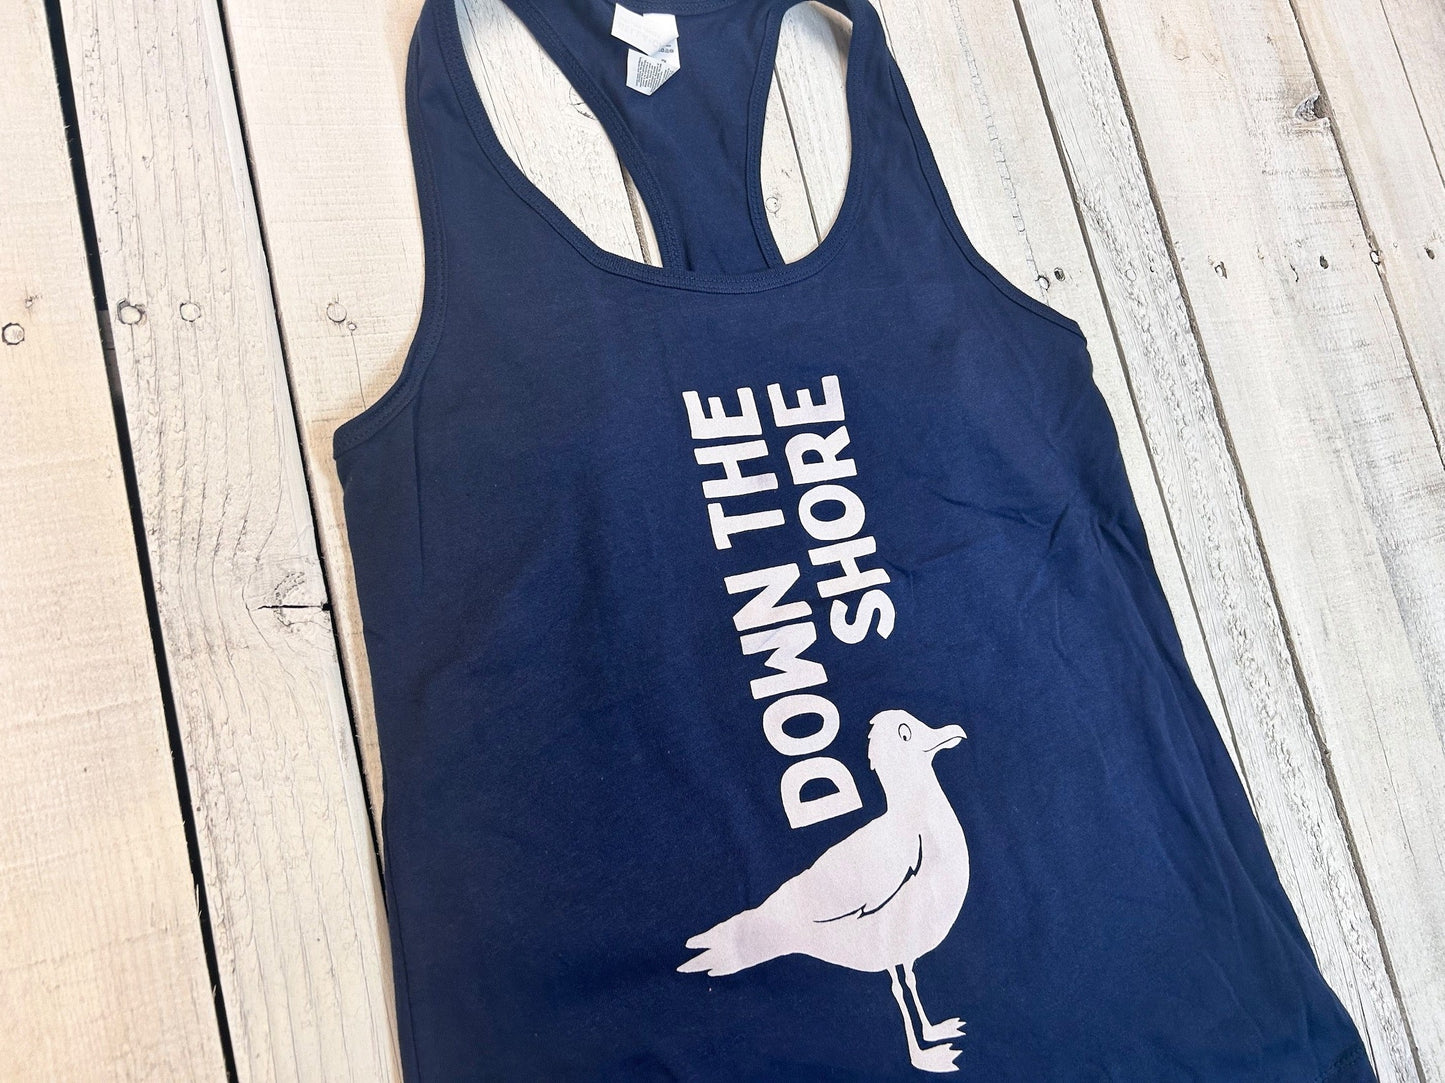 BlueRooted Down The Shore Seagull Navy Racerback Tank